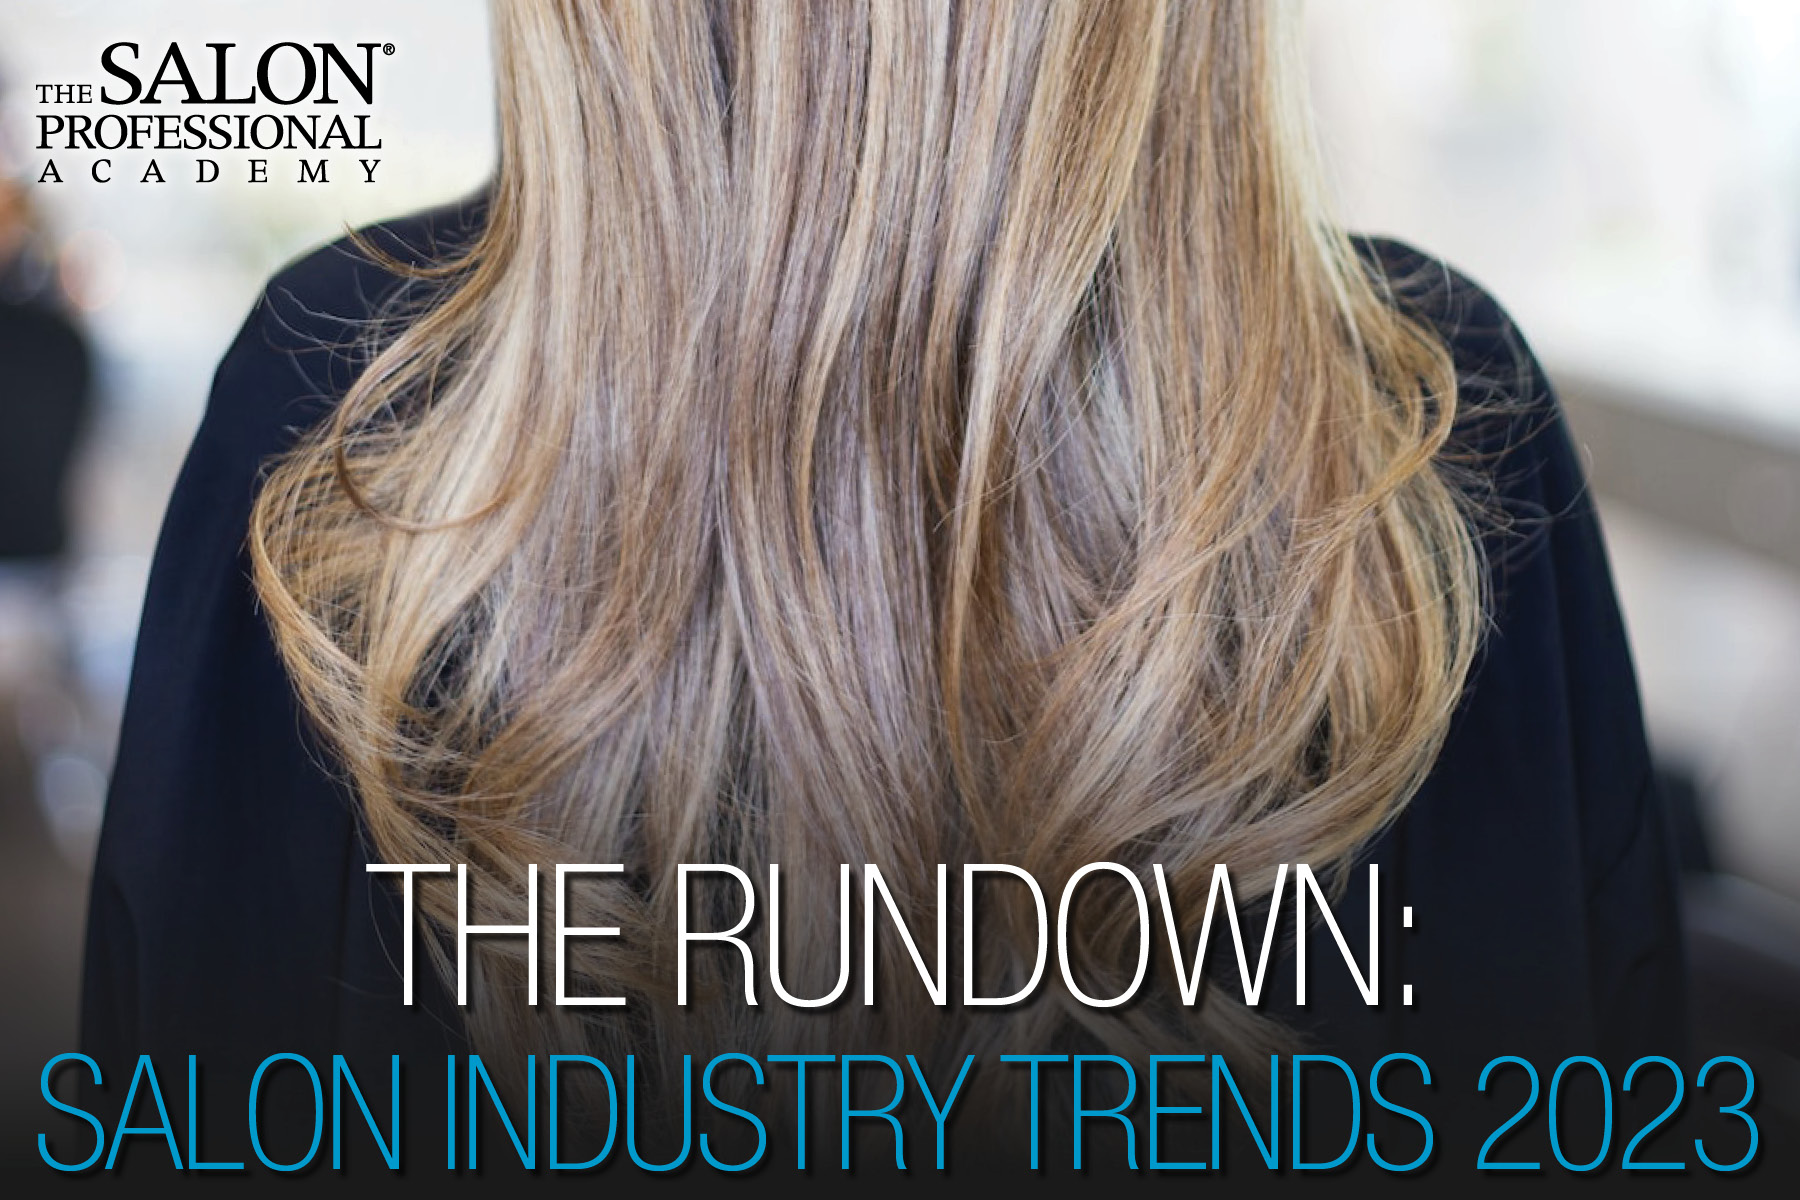 Running a Salon Properly Requires Keeping Up with Current Trends. Here's TSPA's Salon Industry Trends List That ALL Beauty Bosses Should Follow in 2023.